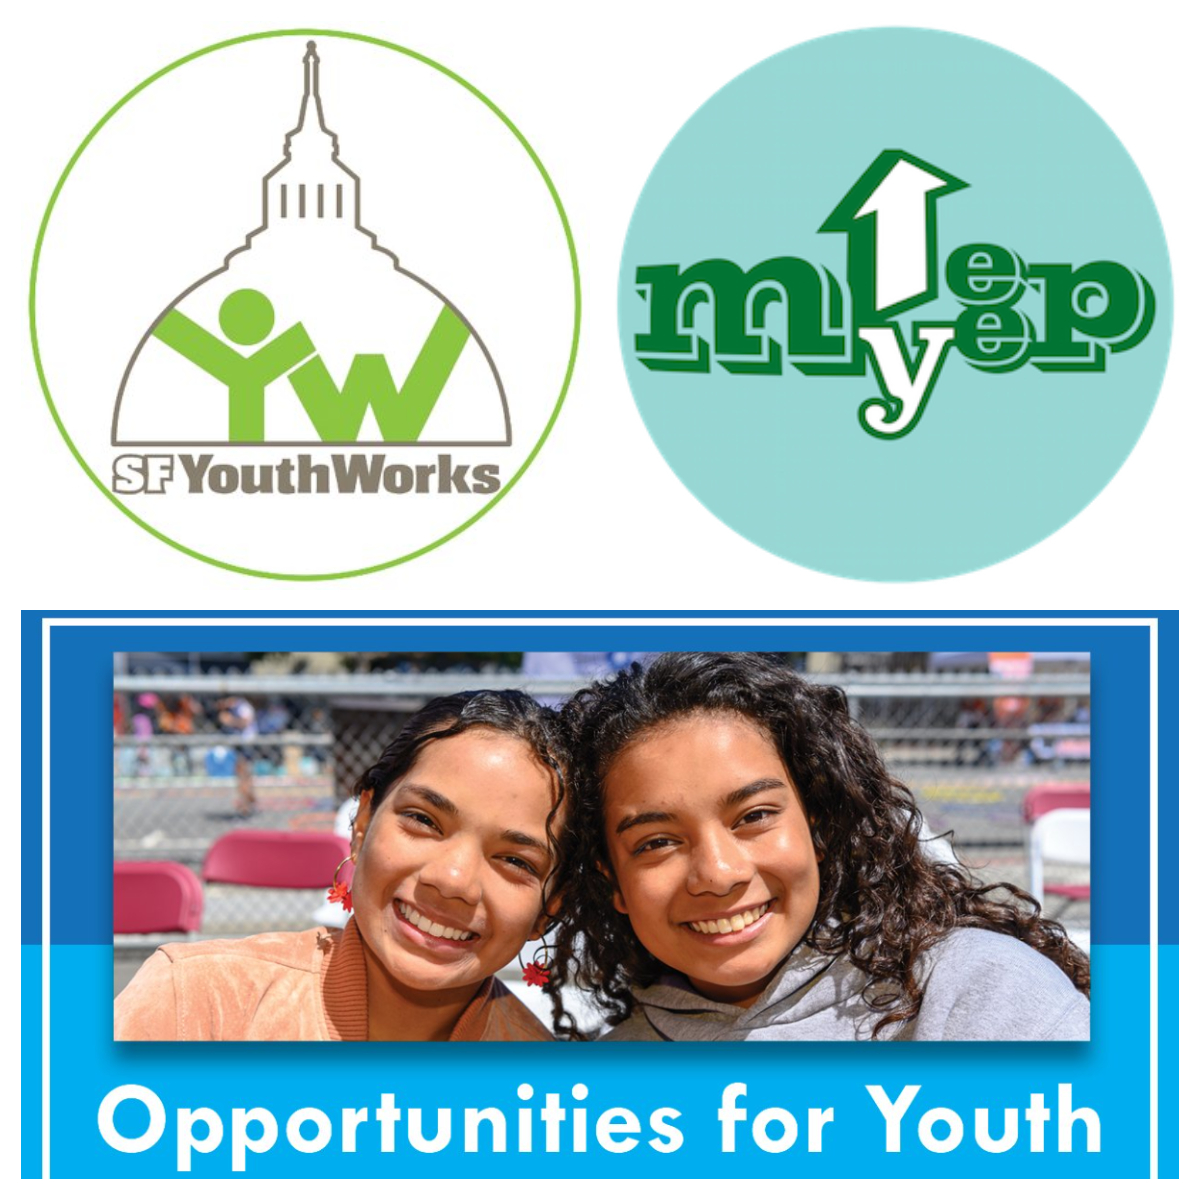 If you are or know a #SanFrancisco young person who wants a paid(!) internship this summer, a big deadline is coming very soon: applications for SF YouthWorks and the Mayor's Youth Employment and Education Program (MYEEP) are due by Friday, April 12! dcyf.org/youth-opportun…